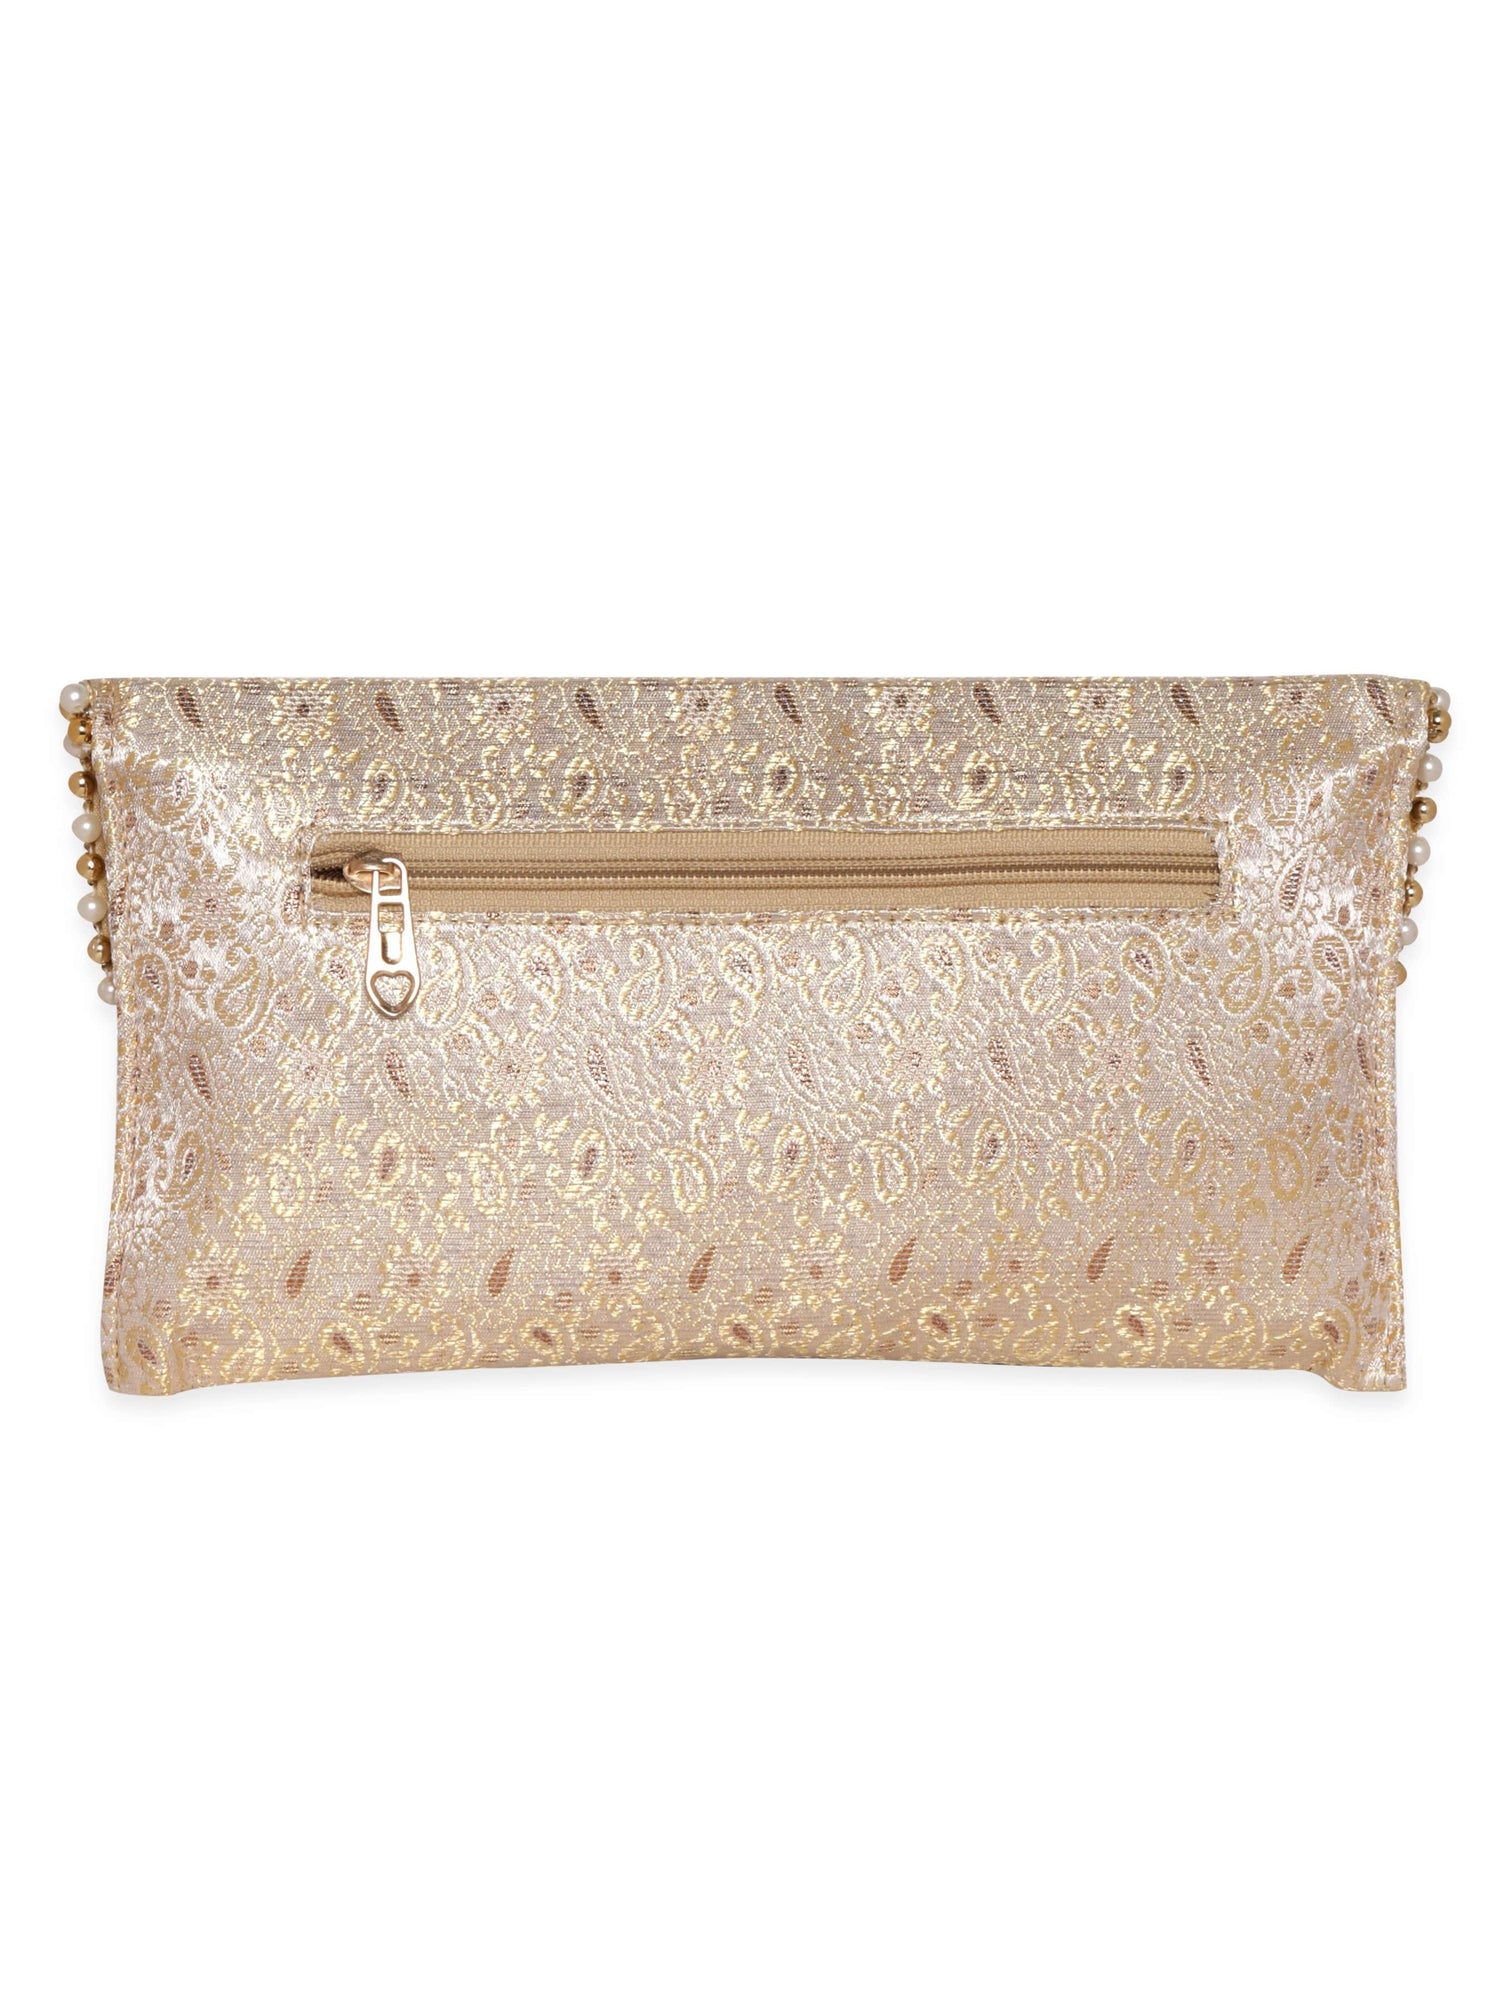 Rubans Golden Embroidery Clutch with Beads Handbag, Wallet Accessories &amp; Clutches